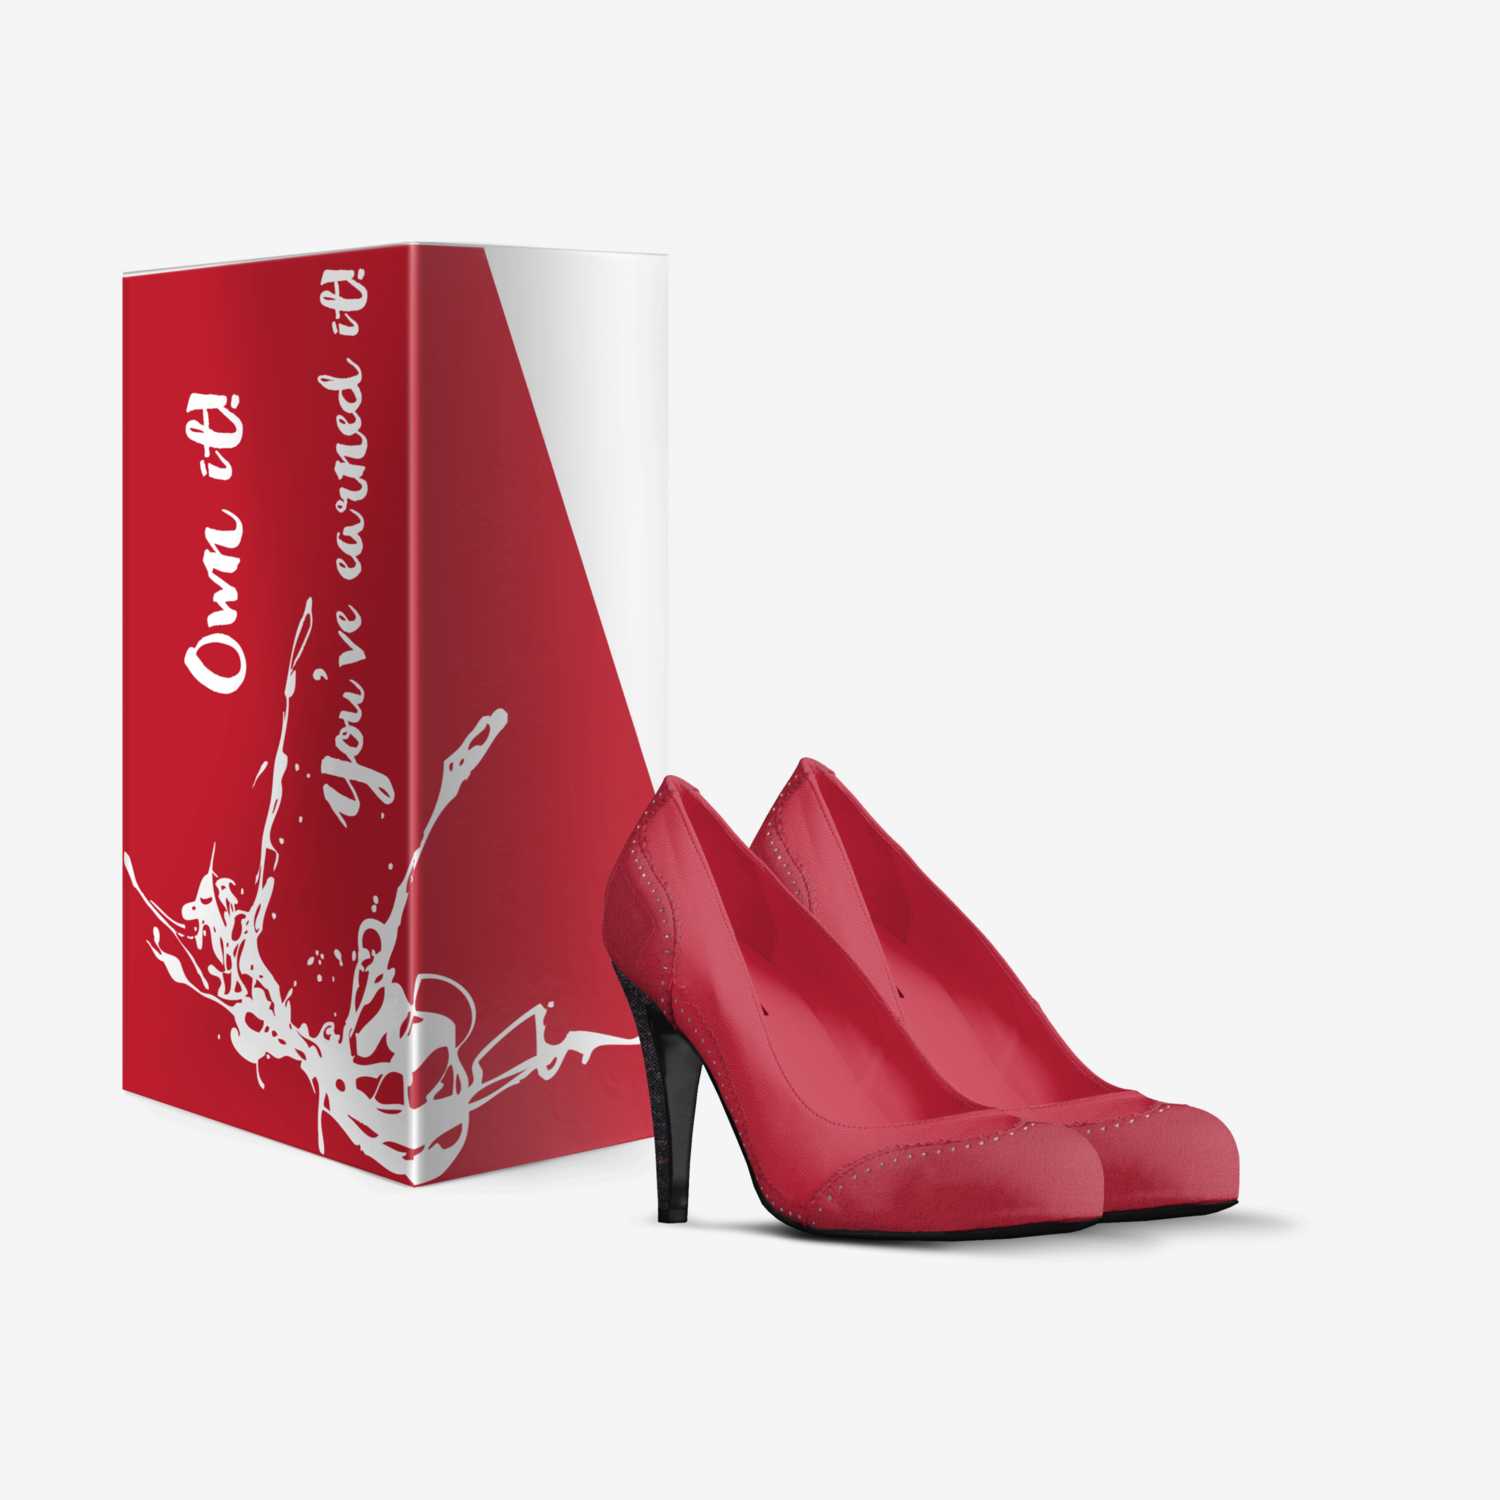 SENSUALS custom made in Italy shoes by Gene | Box view